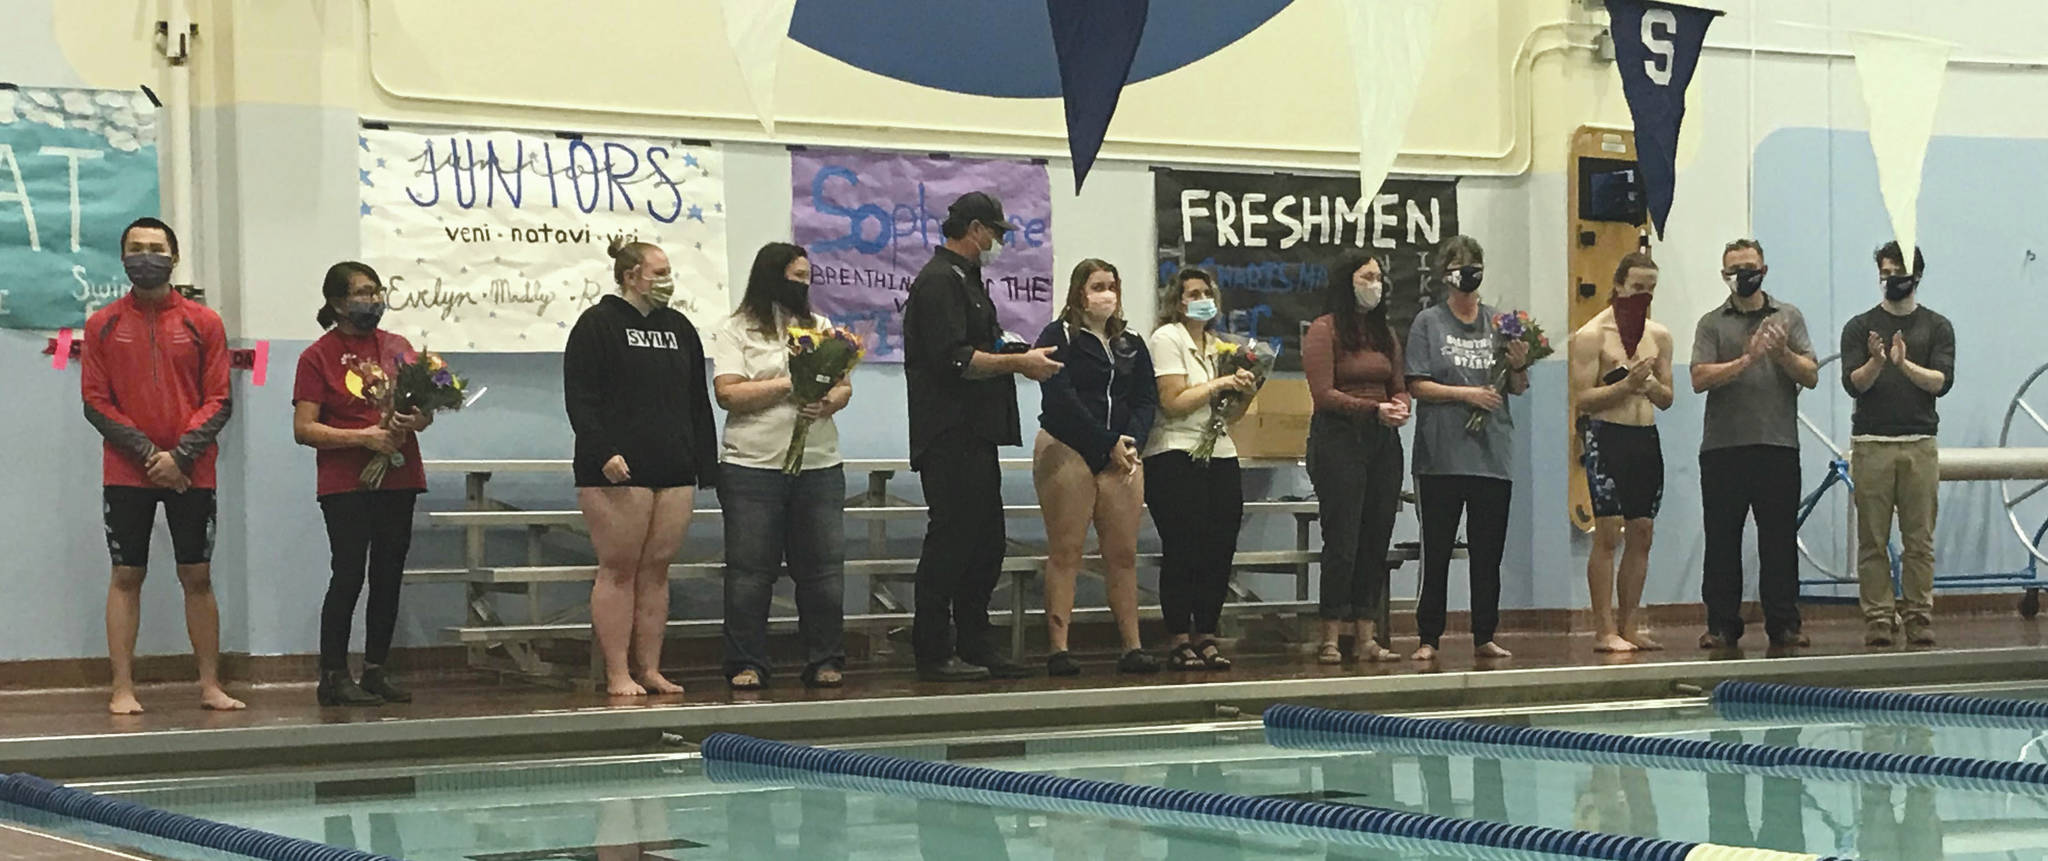 Soldotna High School senior swimmers are honored Oct. 30, 2020, at Soldotna High School. The seniors, from left to right, are Nathan Pitka, Emma Snyer, Deloma Watkins, Kat Gross and Brandon Christenson. (Photo provided by Luke Herman)